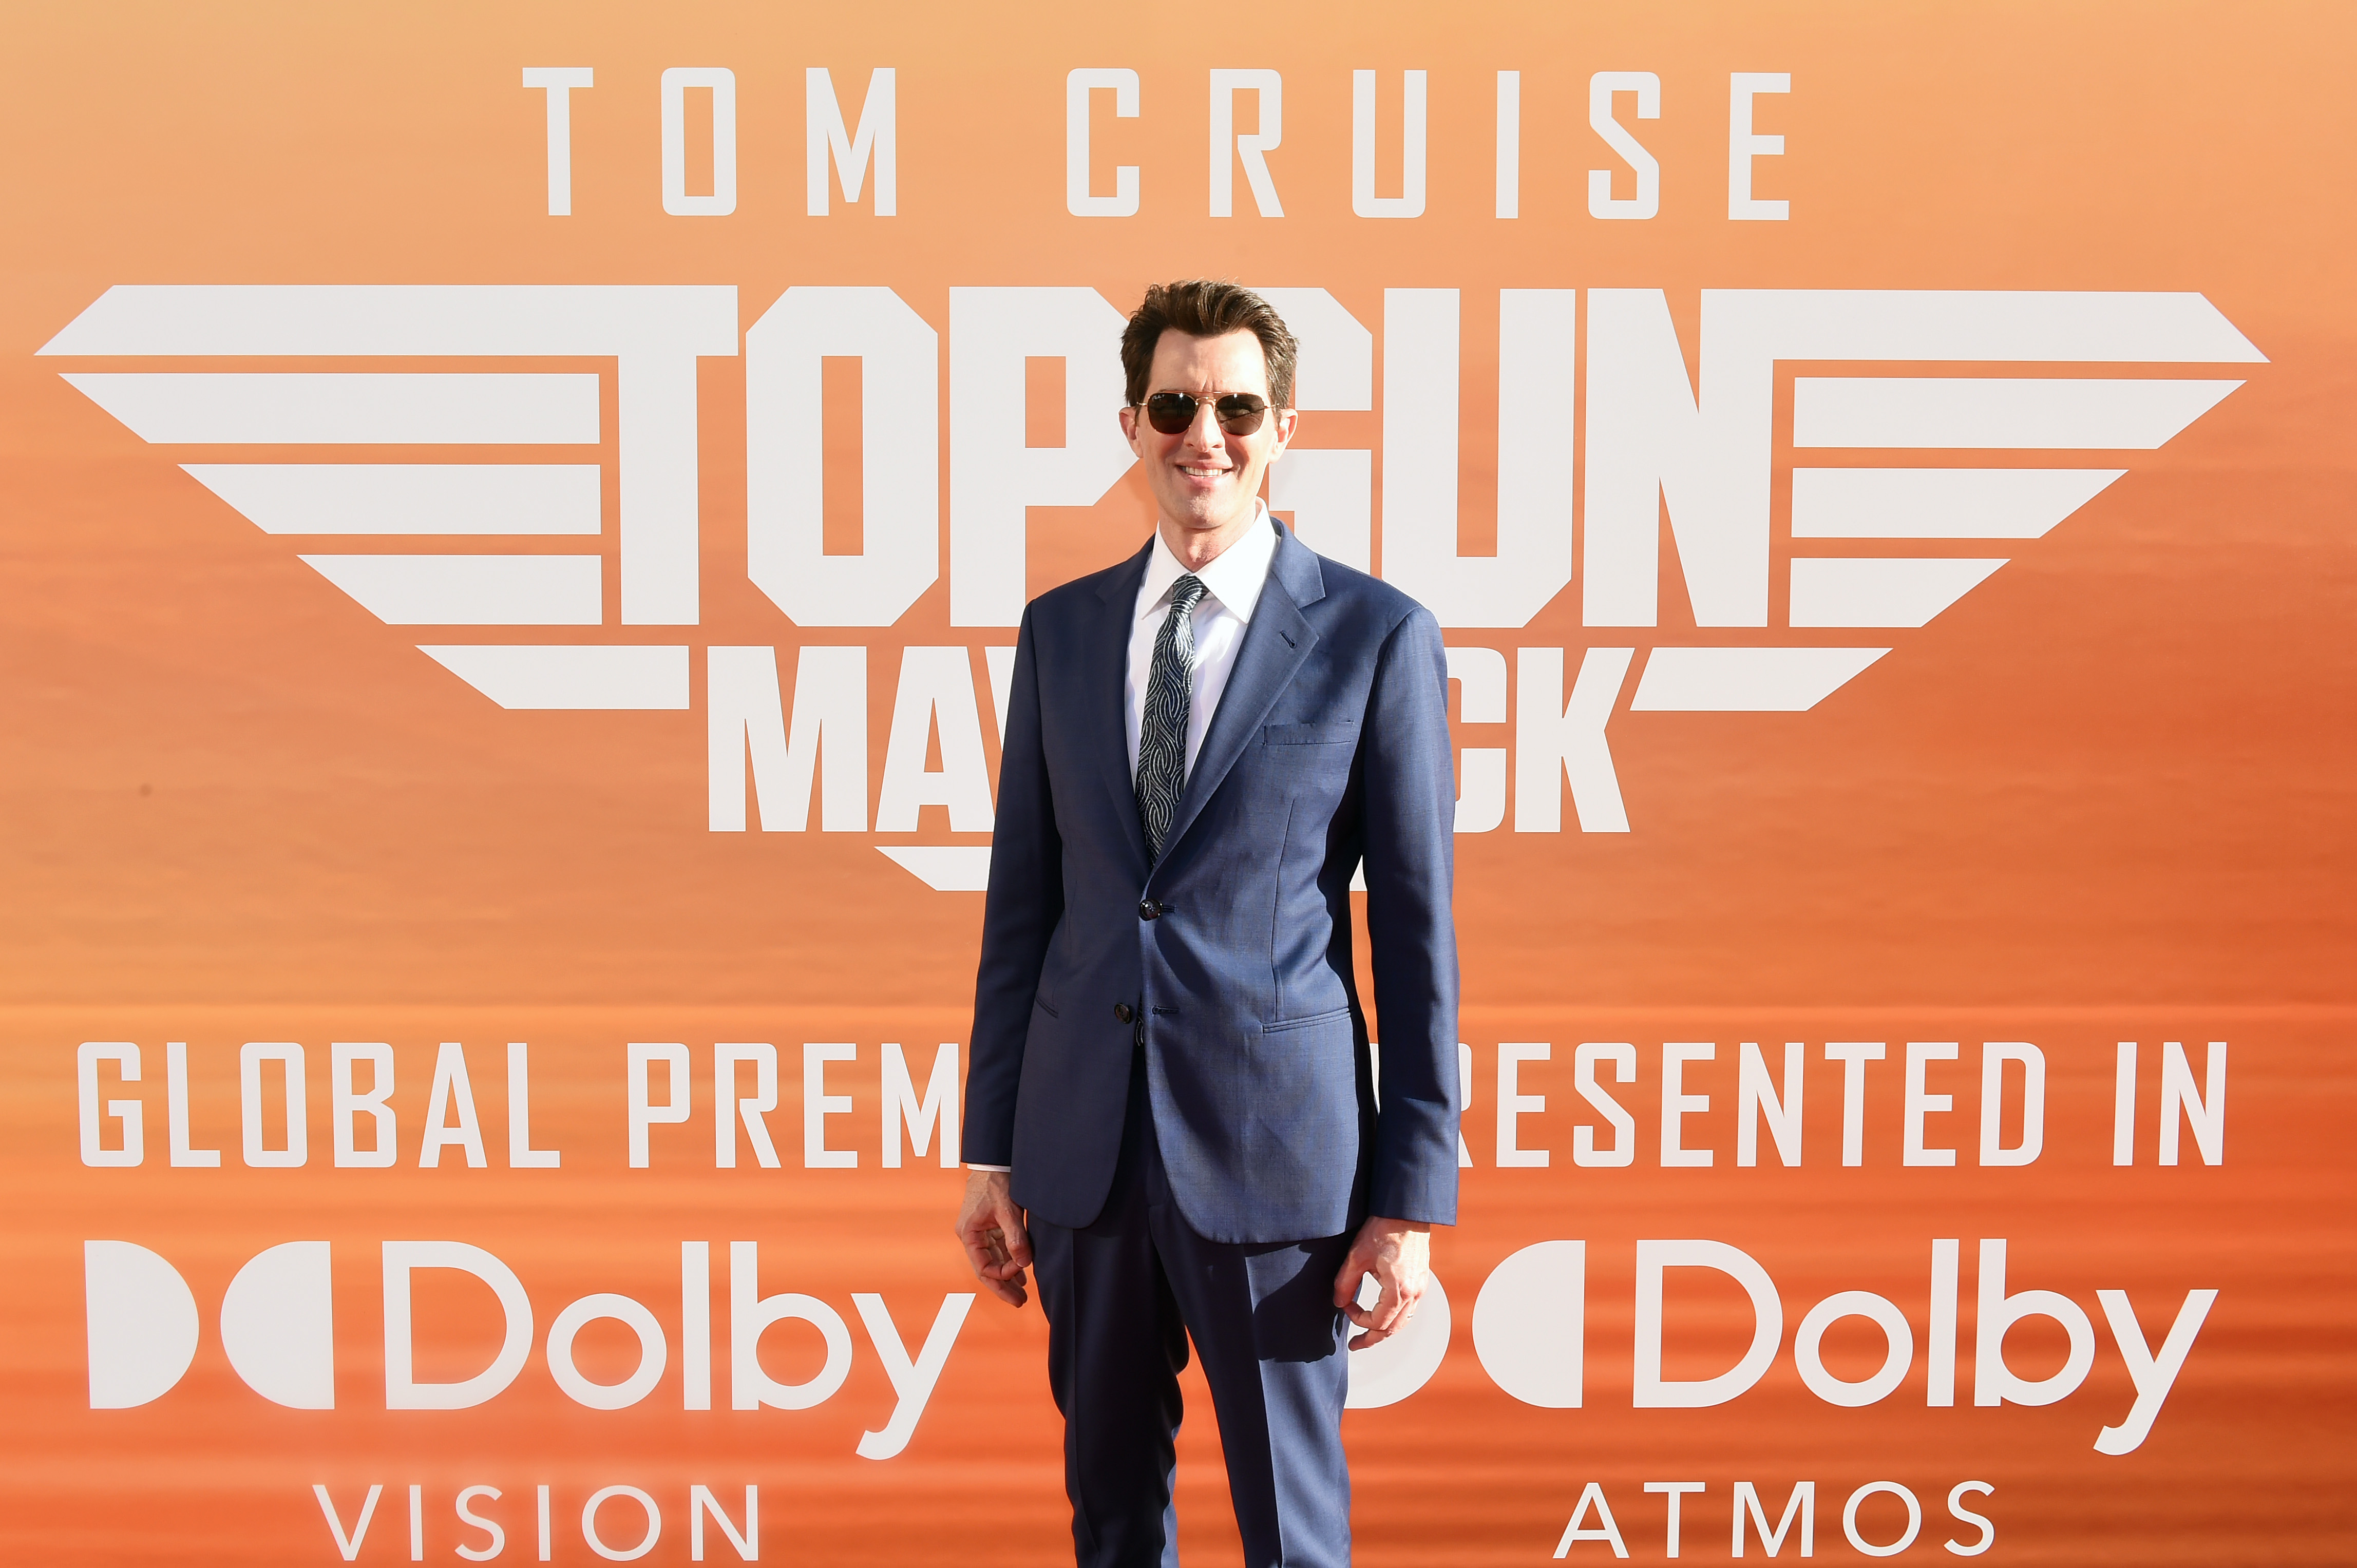 Joseph Kosinski attends the premiere of Top Gun: Maverick which features a song by Lady Gaga